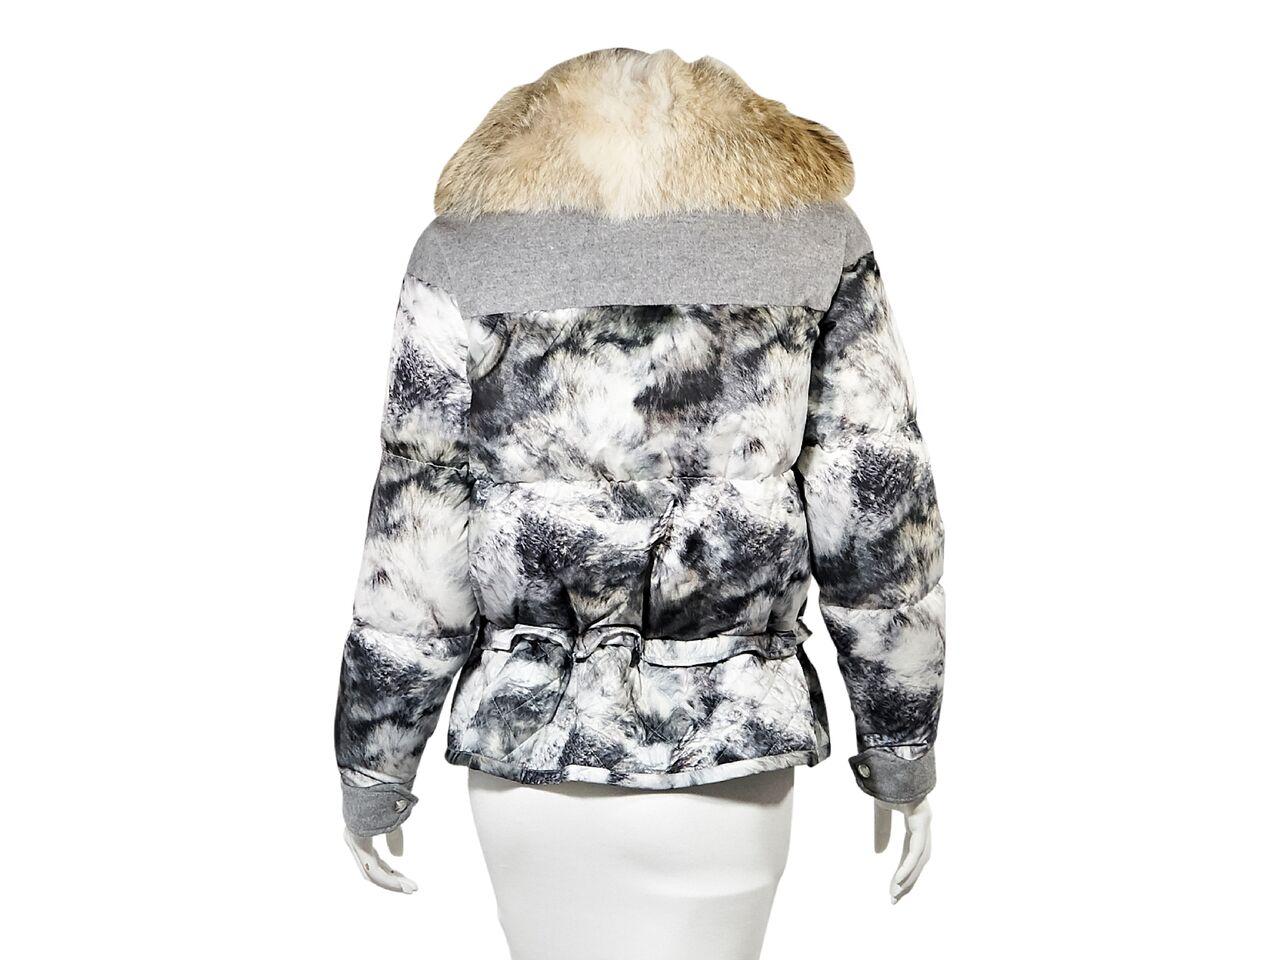 Product details:  Grey and white printed puffer coat by Belstaff.  Accented with jersey details.  Fur collar.  Long sleeves.  Concealed zip-front closure.  Drawstring waist.  Quilted hem.  32